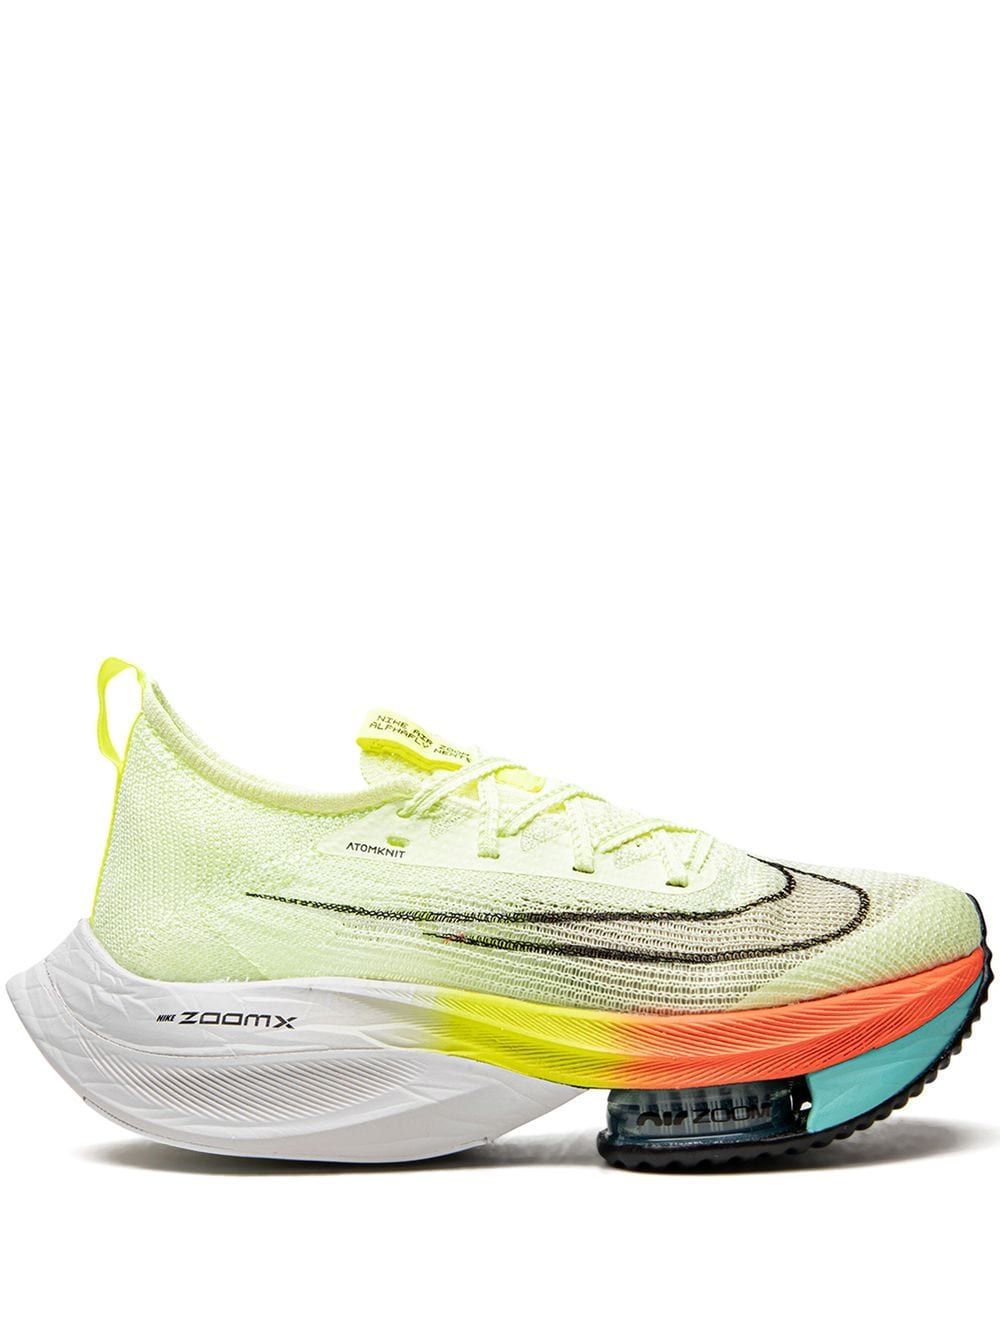 Nike Air Zoom Alphafly Next% sneakers - Yellow von Nike